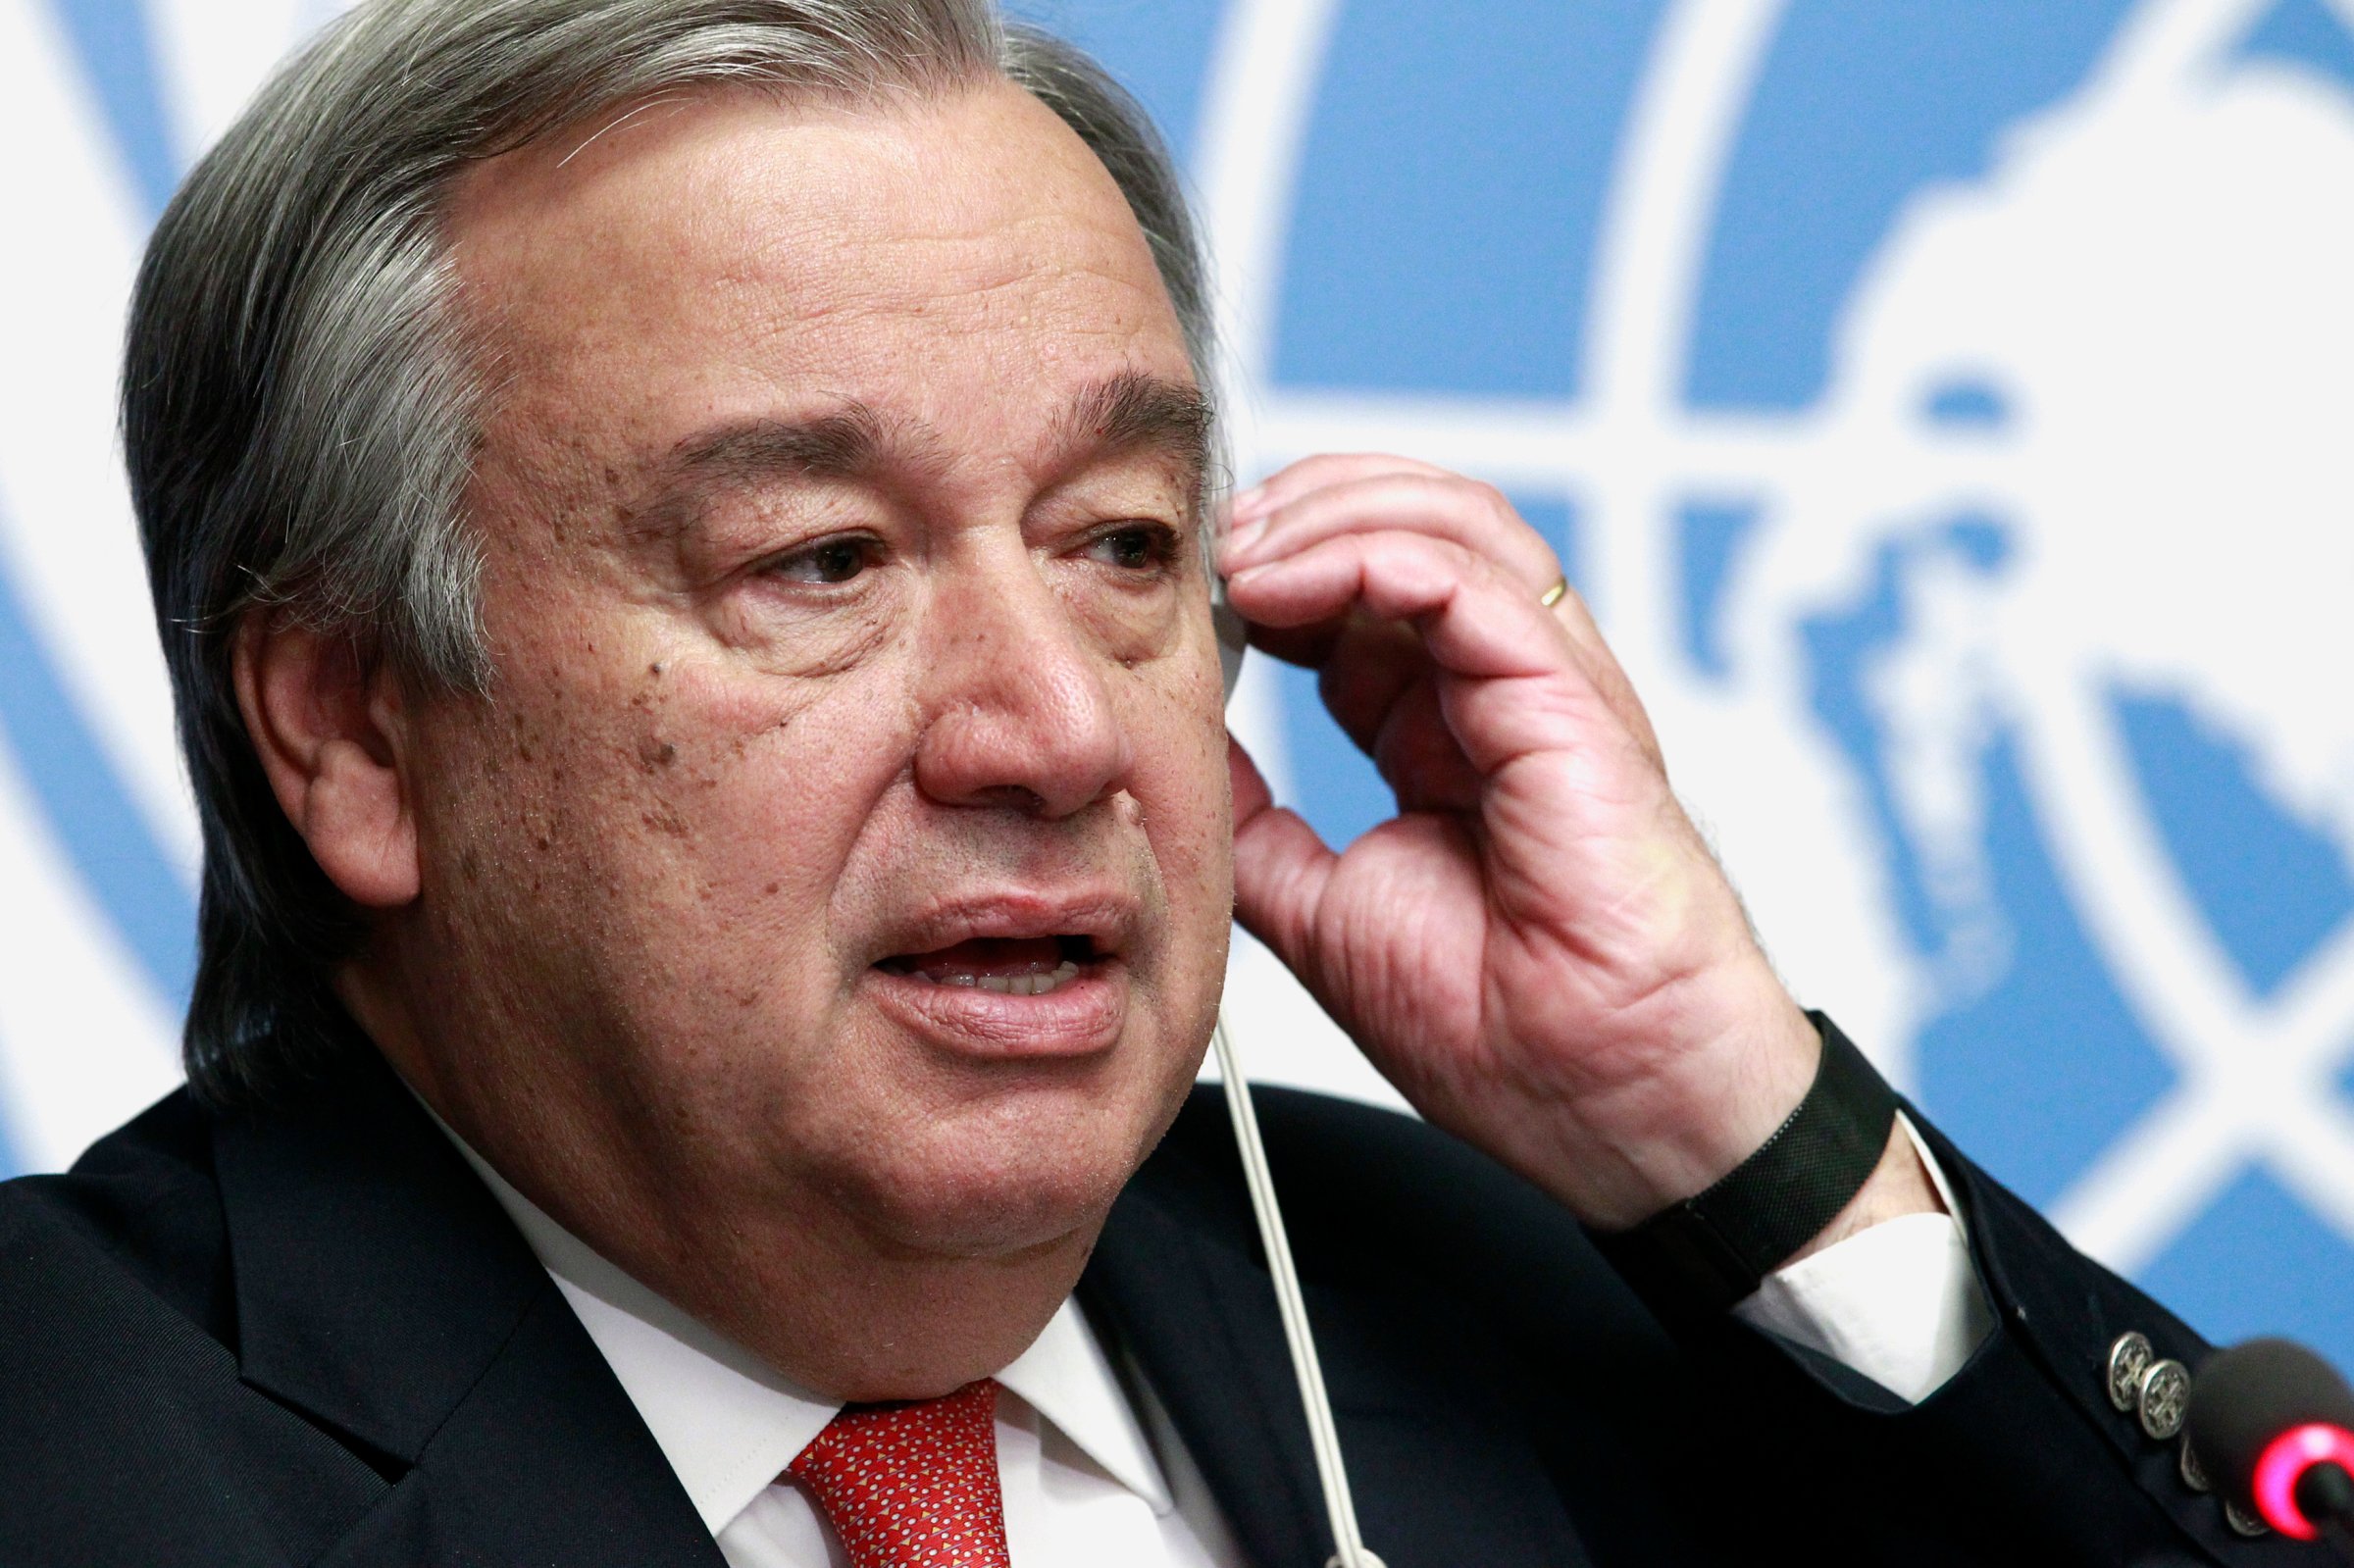 UN High Commissioner for Refugees Guterres gestures during a news conference for the Global Humanitarian appeal for 2015 in Geneva